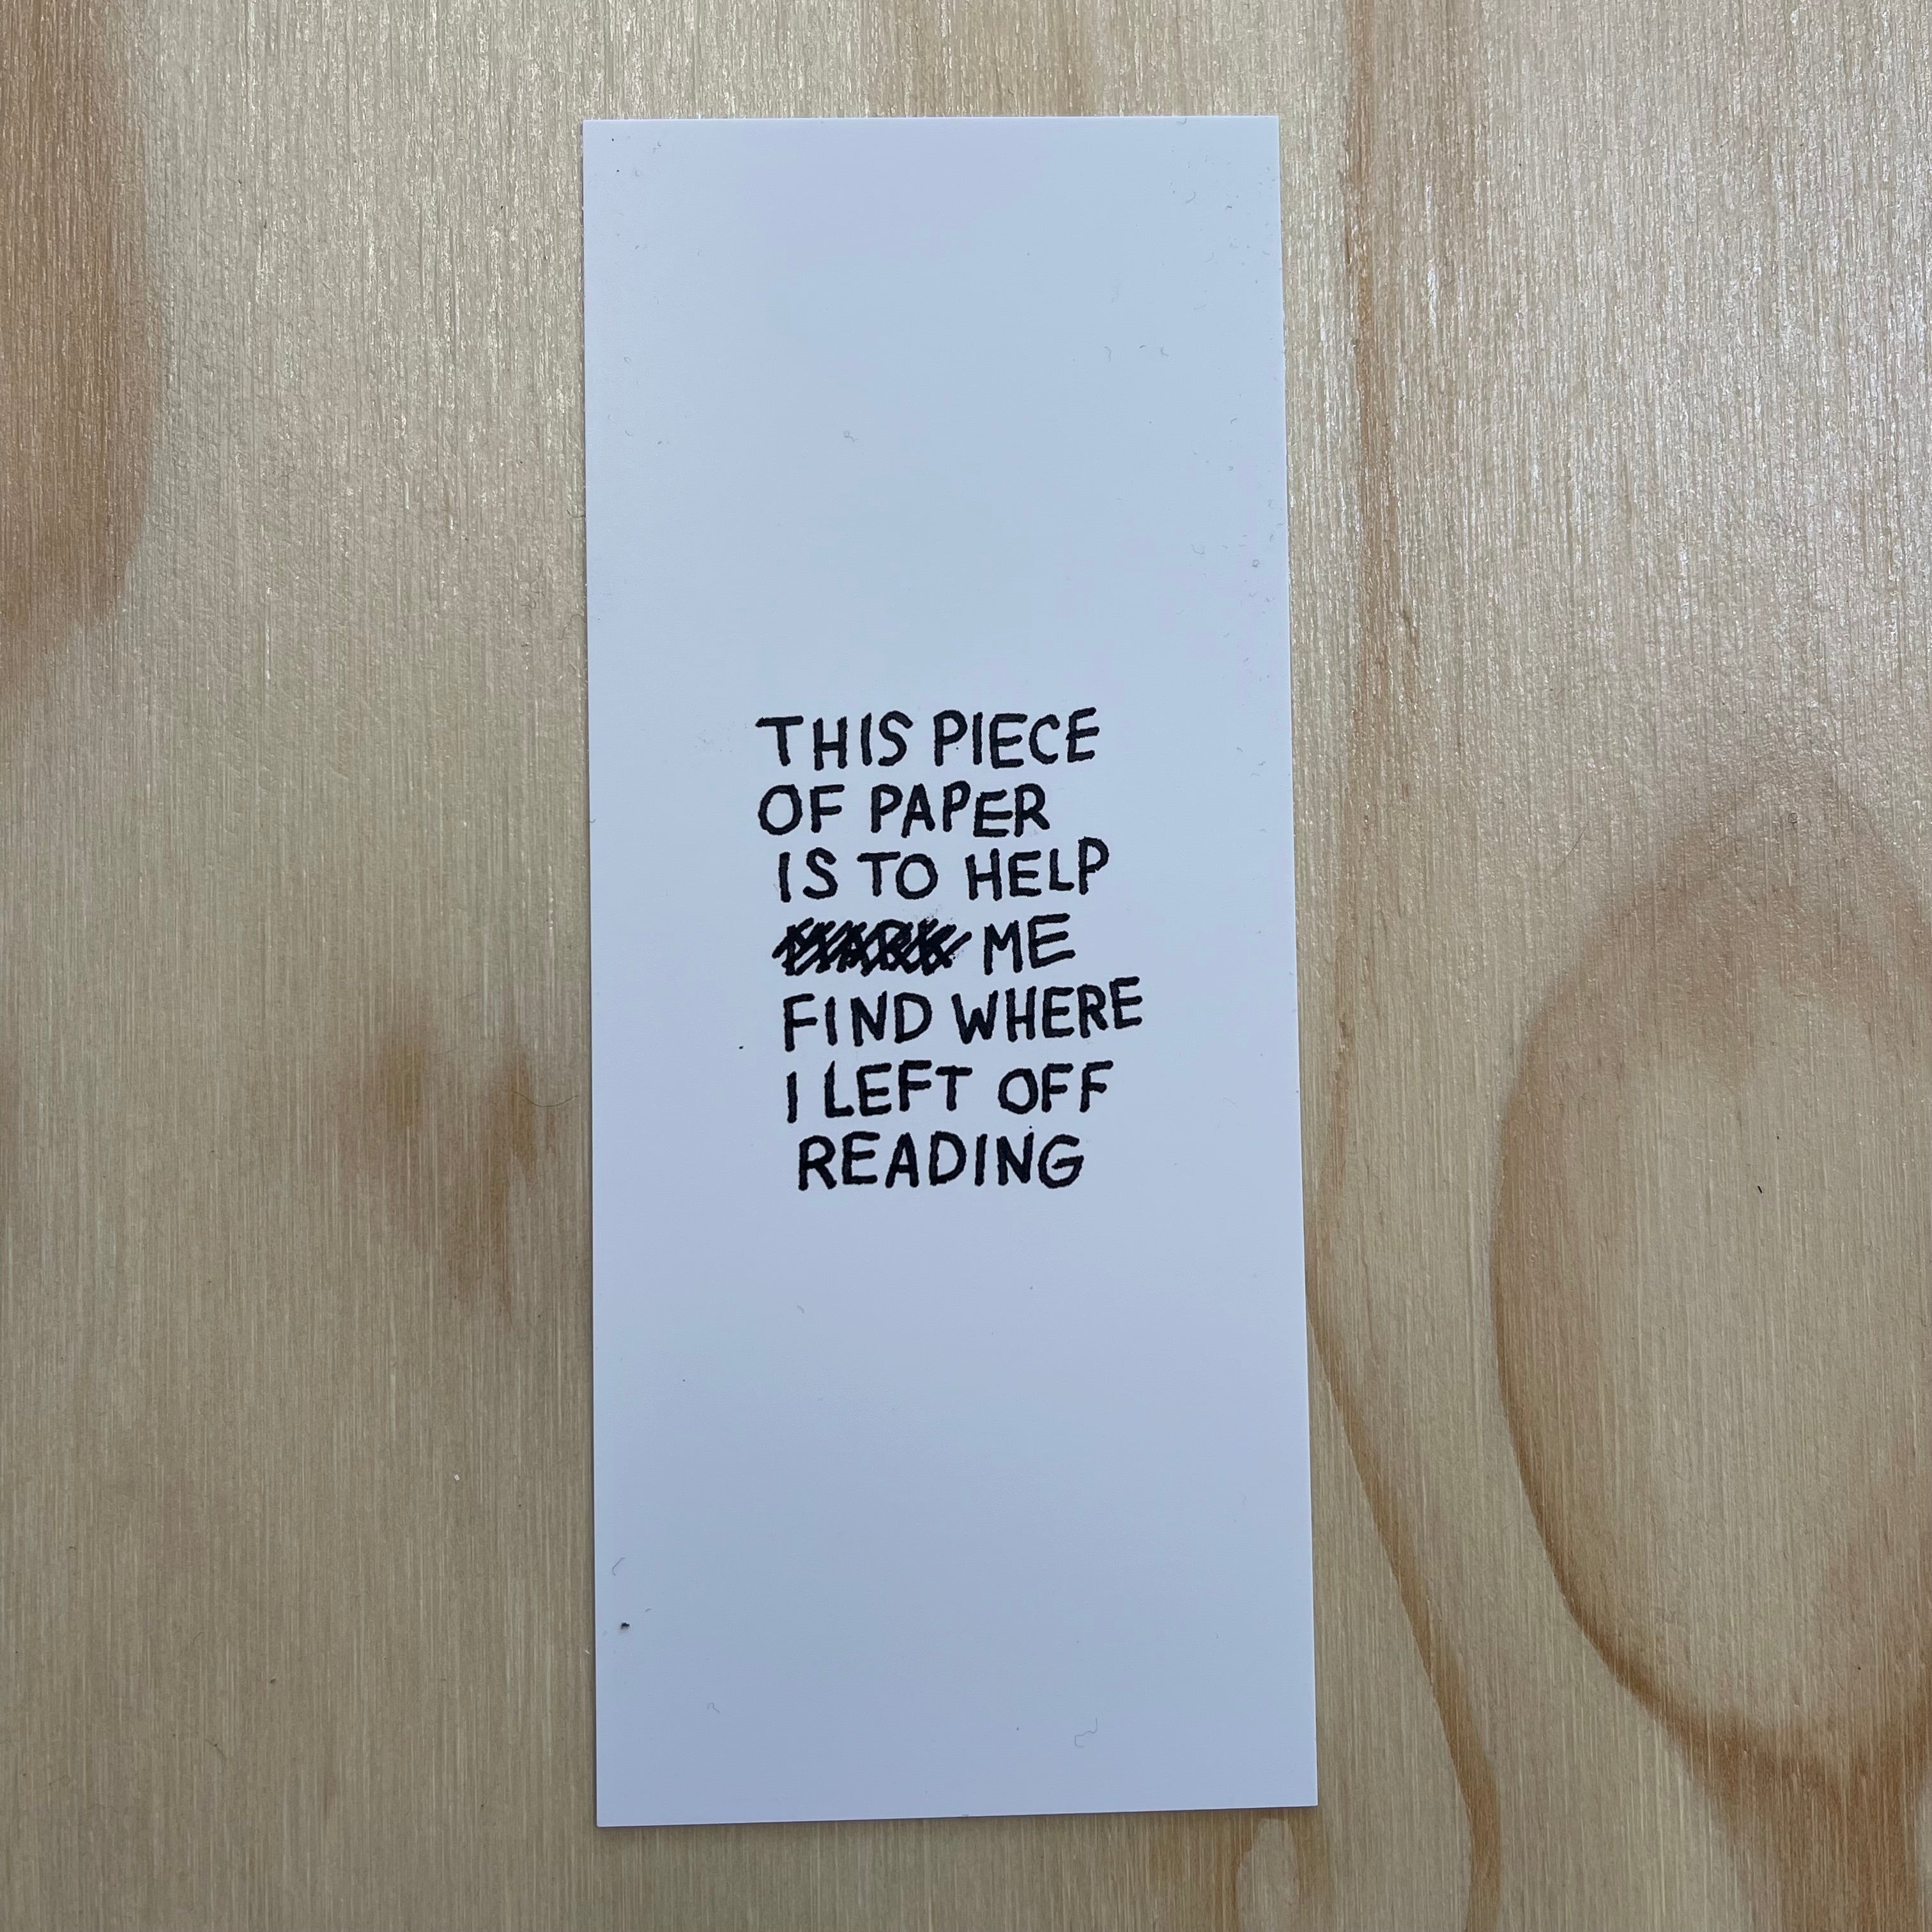 A Good Used Bookmark